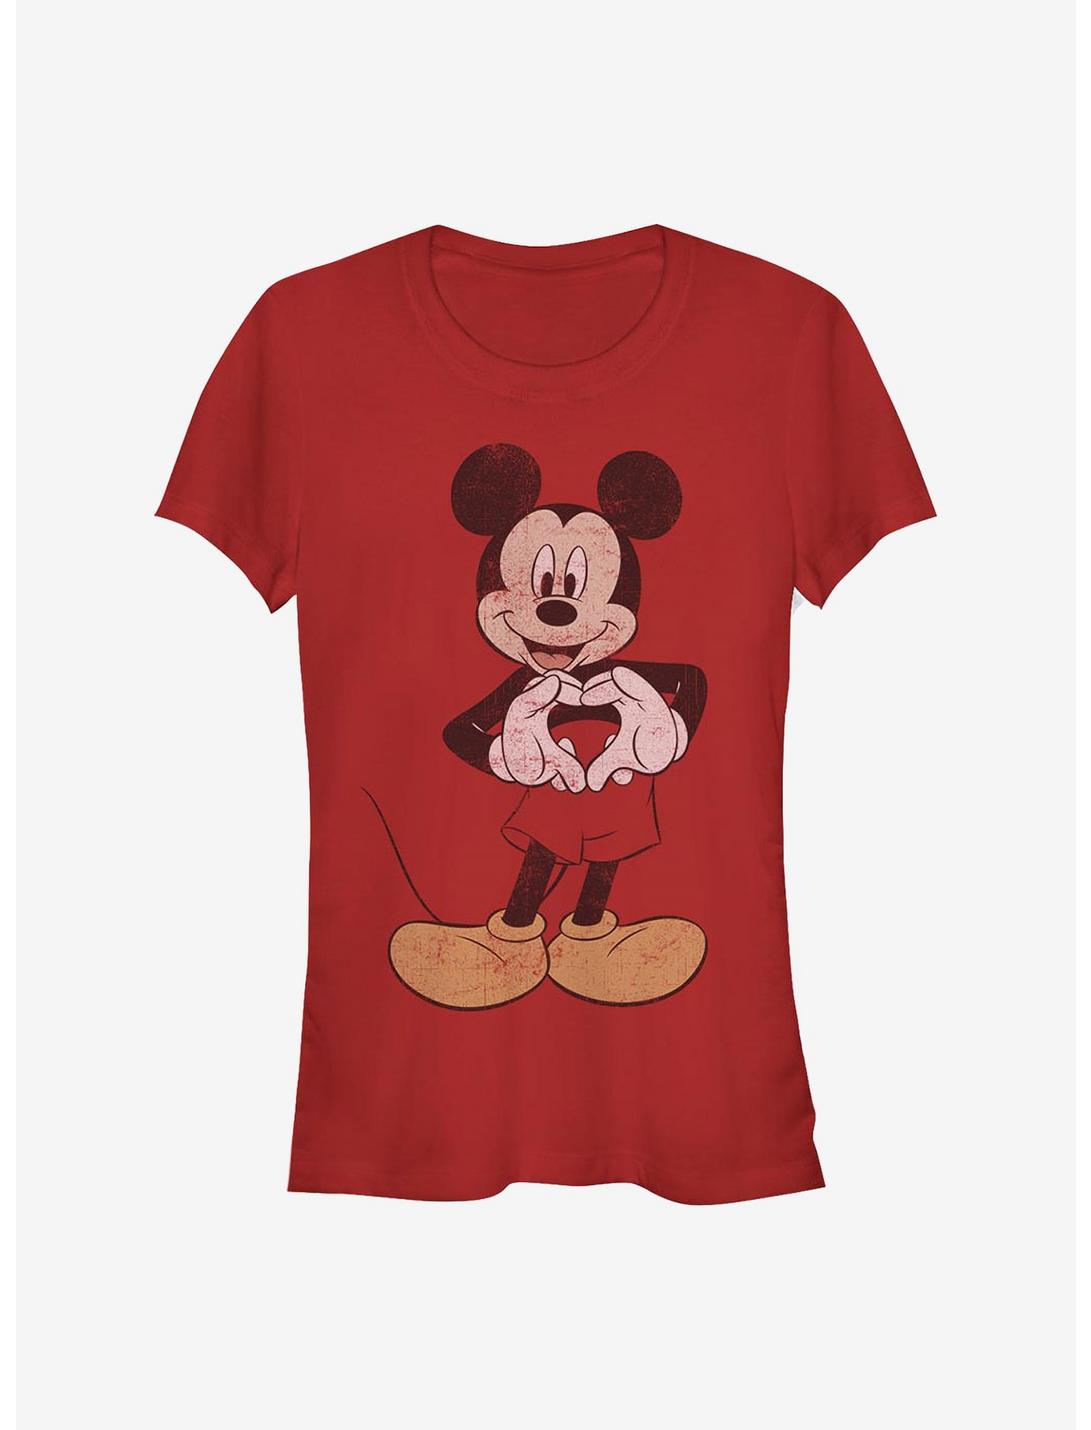 Disney Mickey Mouse Vintage Mickey Girls T-Shirt, RED, hi-res